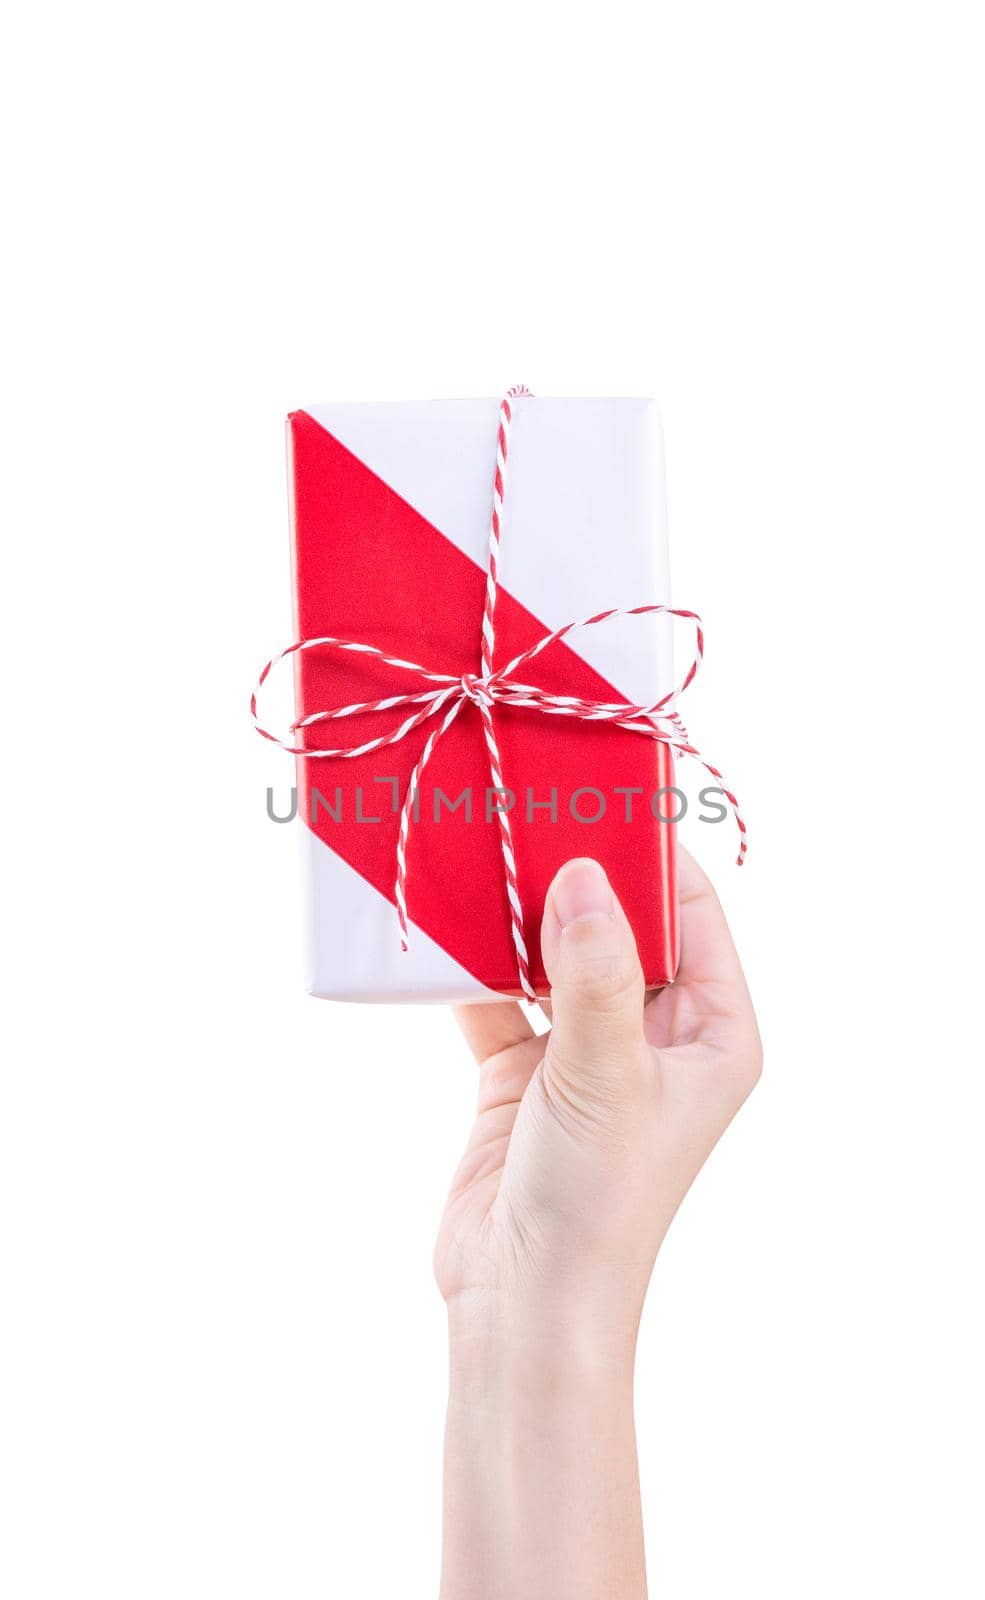 Asian woman holding, giving, sending a wrapped packaged gift box with tied bow-knot isolated on white background, clipping path, cut out, close up. by ROMIXIMAGE